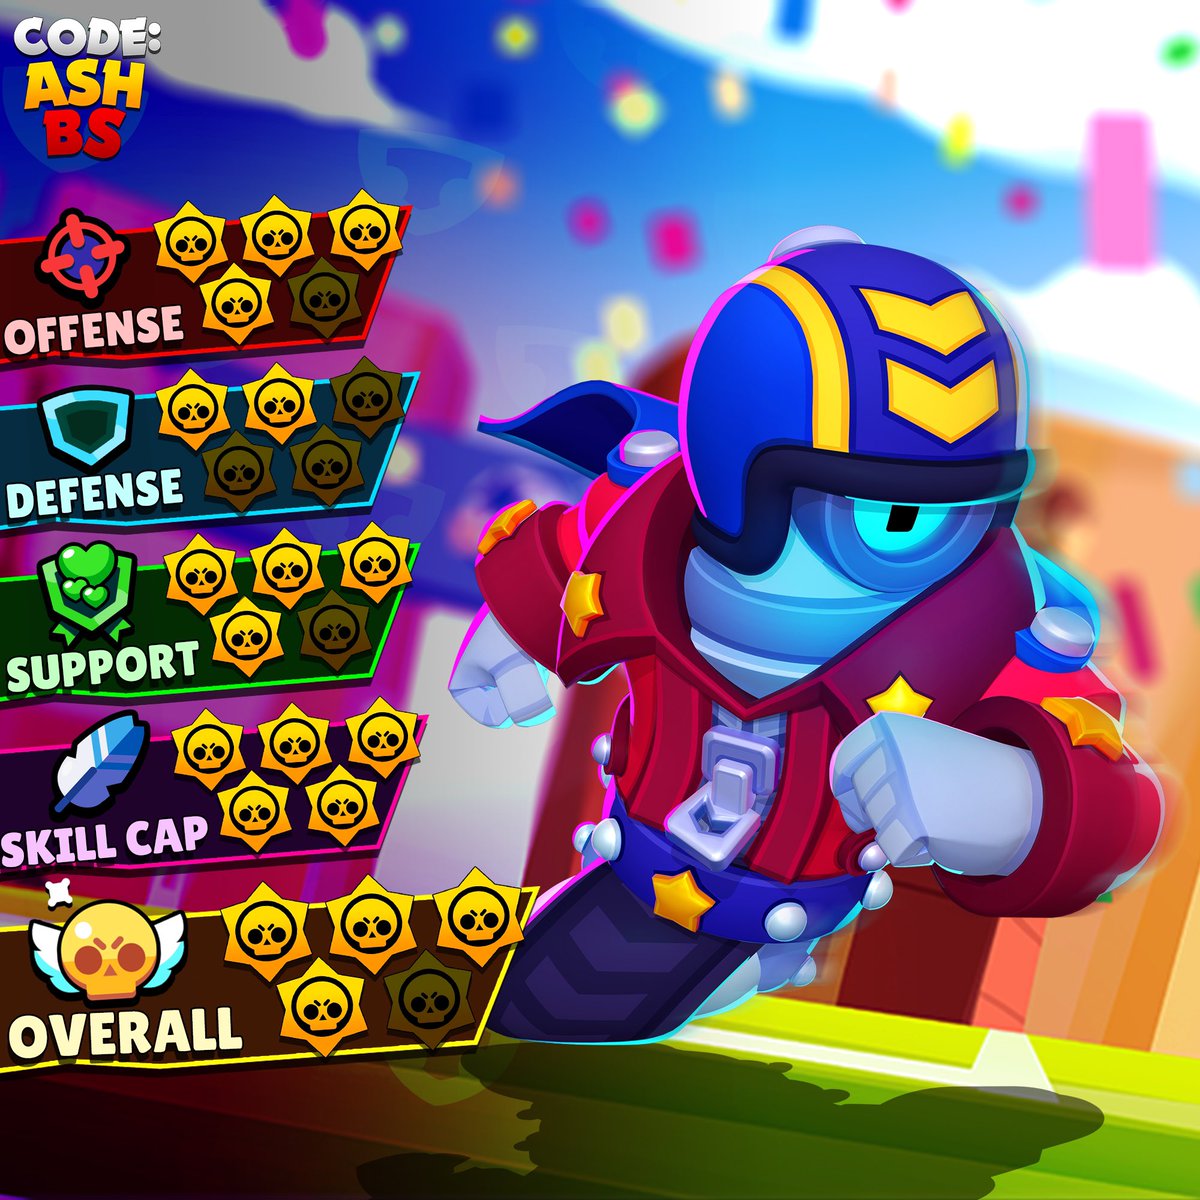 Code Ashbs On Twitter Stu S Power Ratings Great On Offense For Fast Aggressive Plays And Distraction Poor Defense Due To Low Dps But Can Stun Burn With Super Amazing Gadget For - brawl stars brawelr cycle